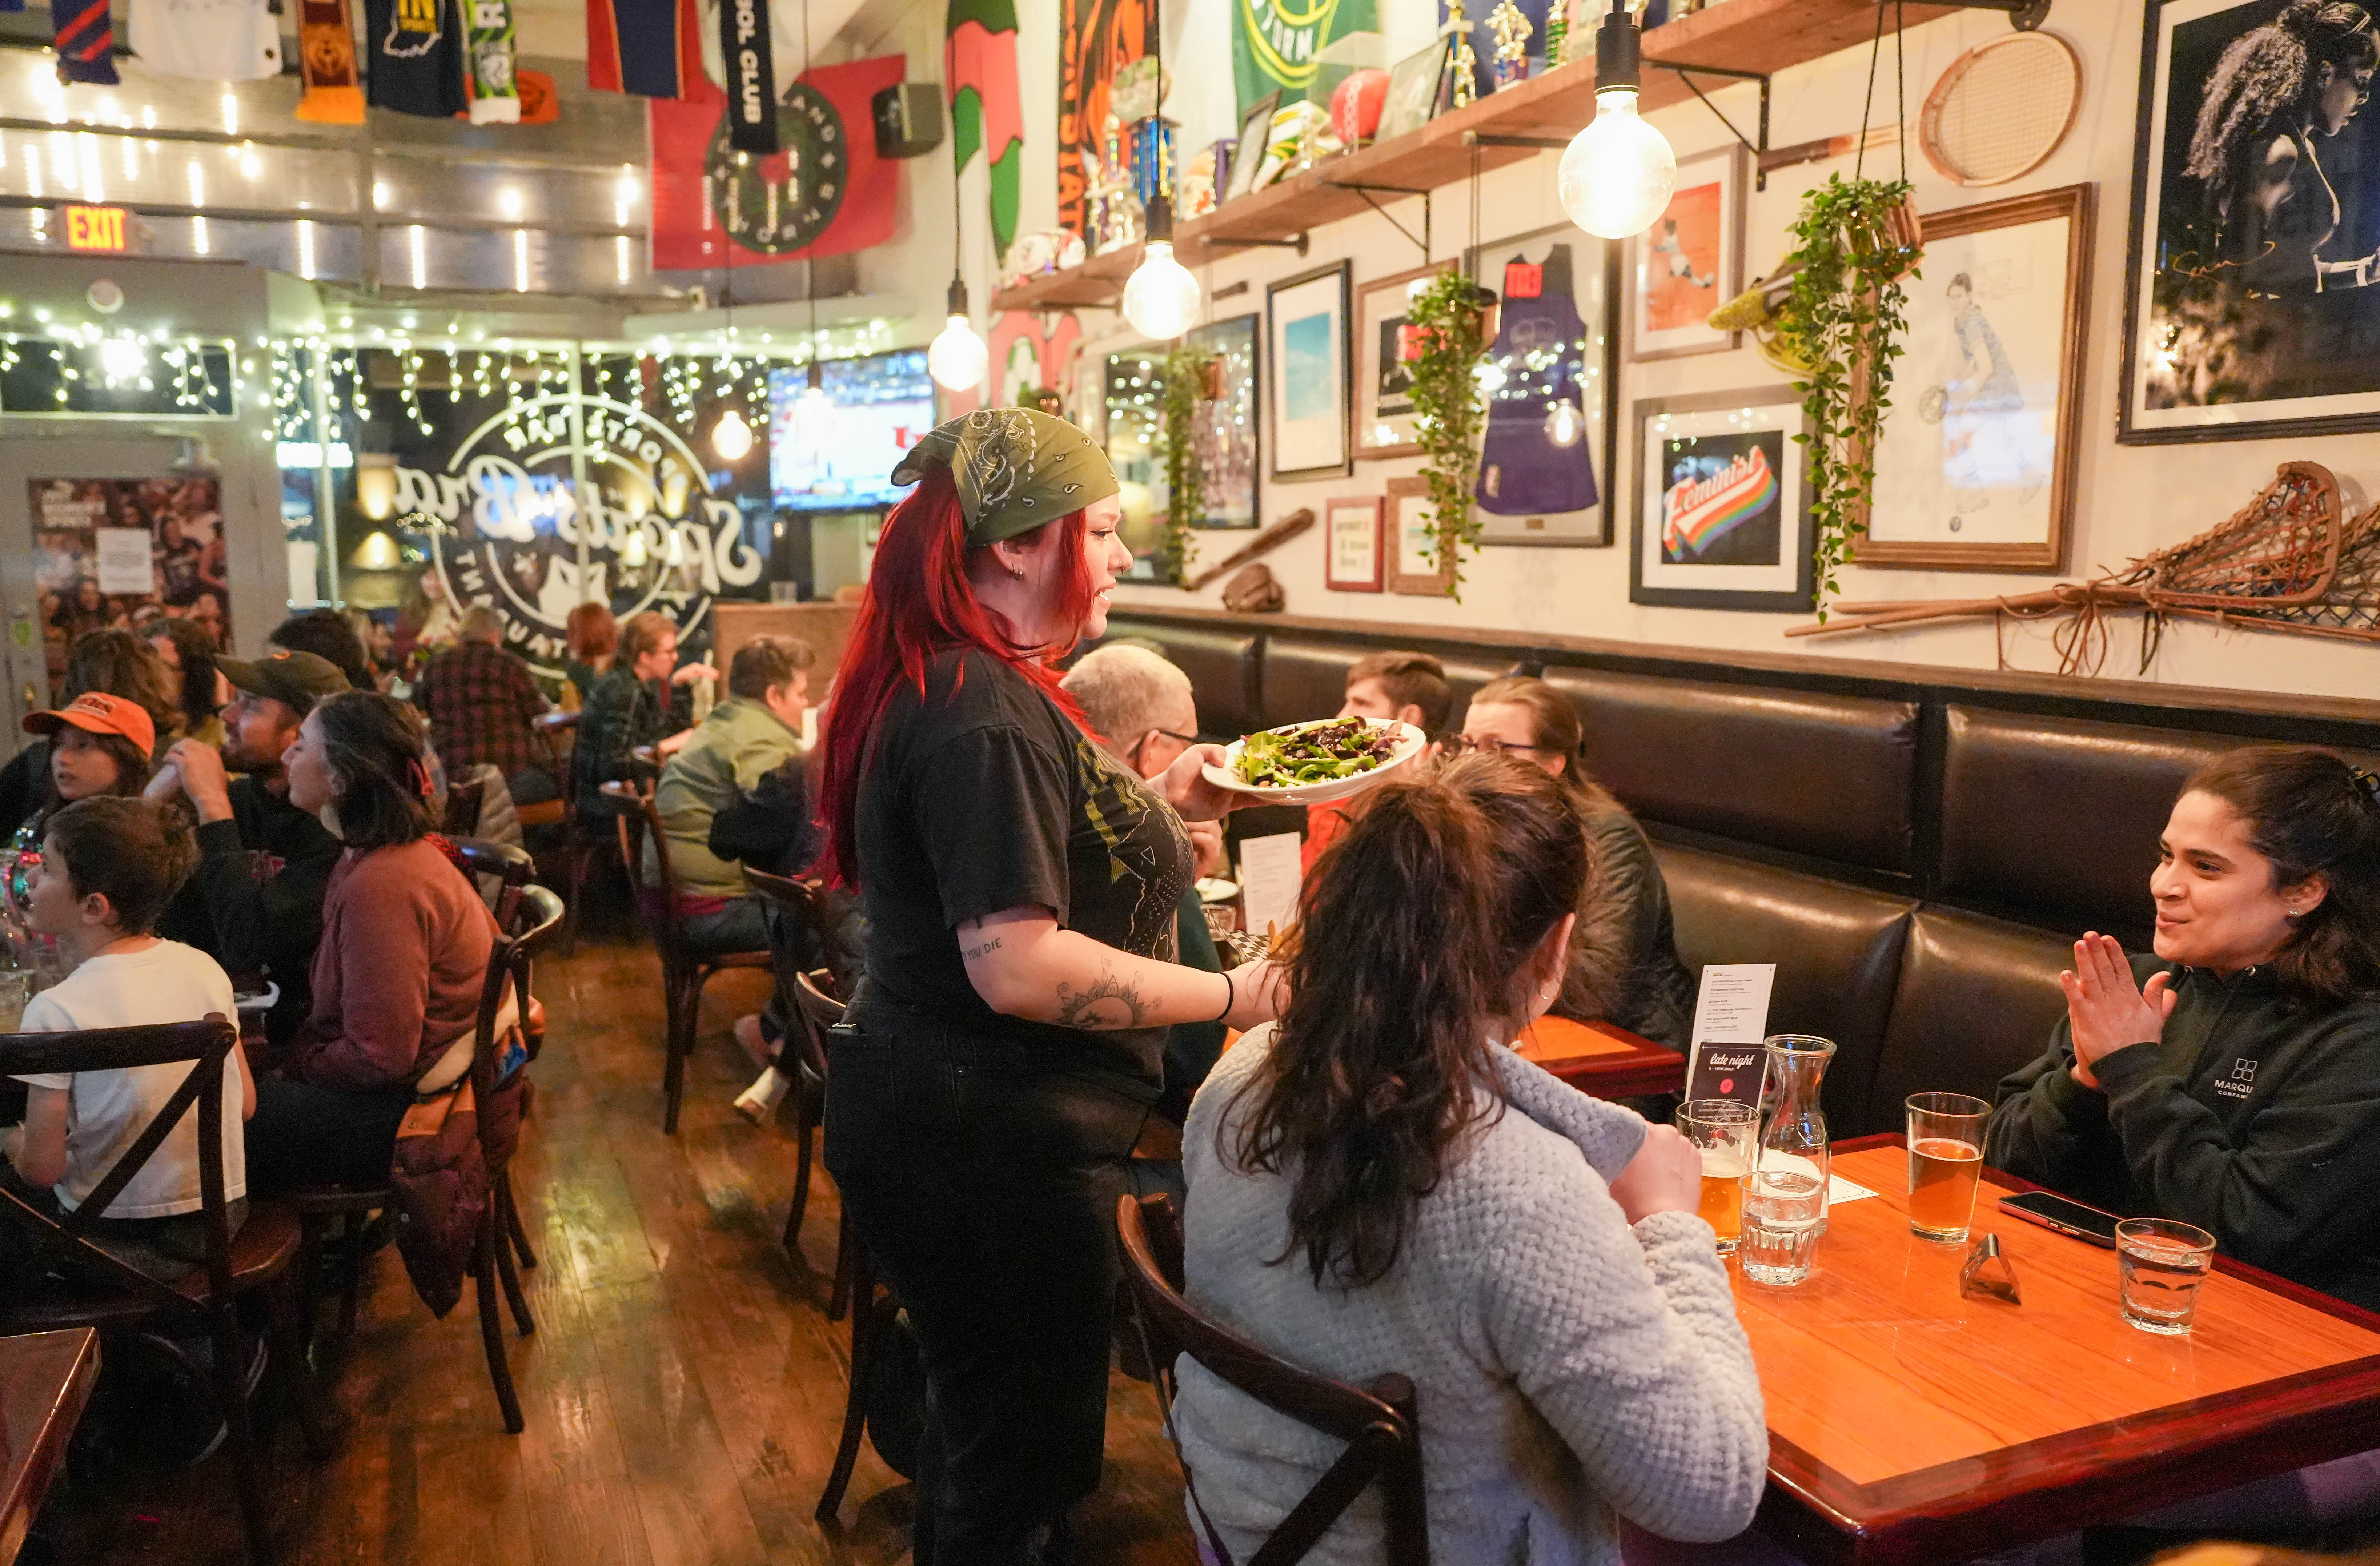 Server delivers food in crowded dining room